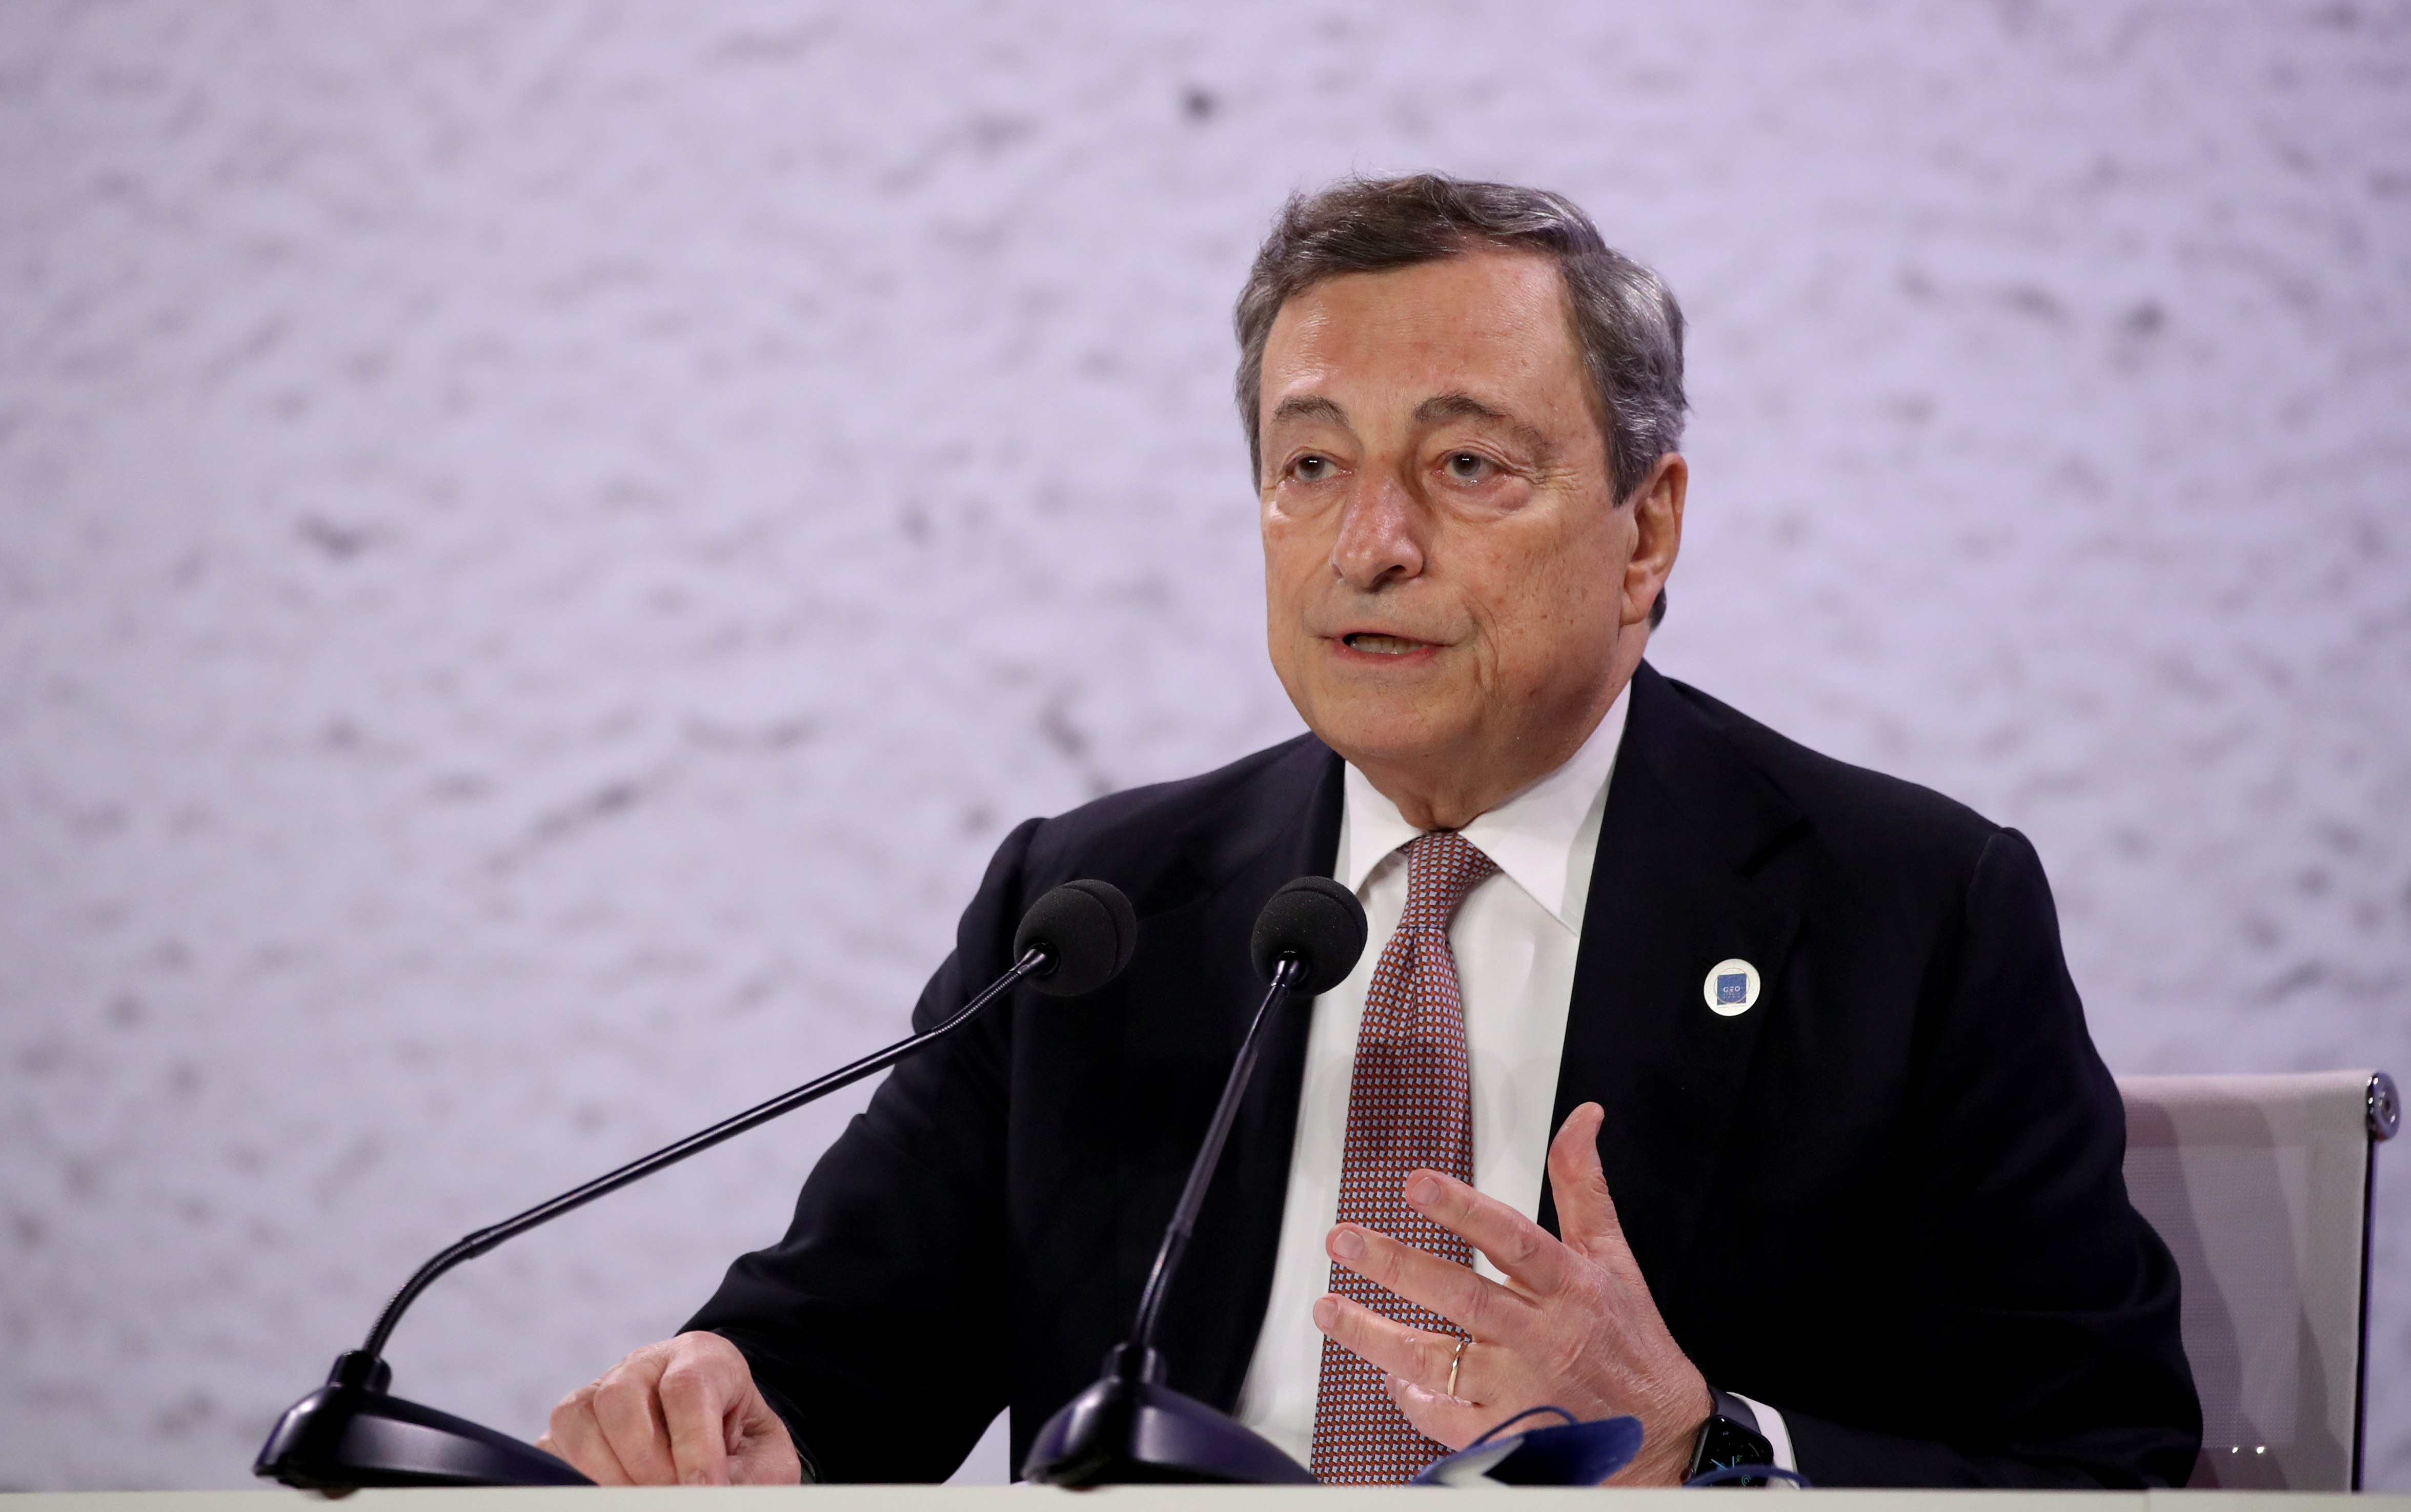 Draghi says G20 a success, made progress on climate goals | Reuters